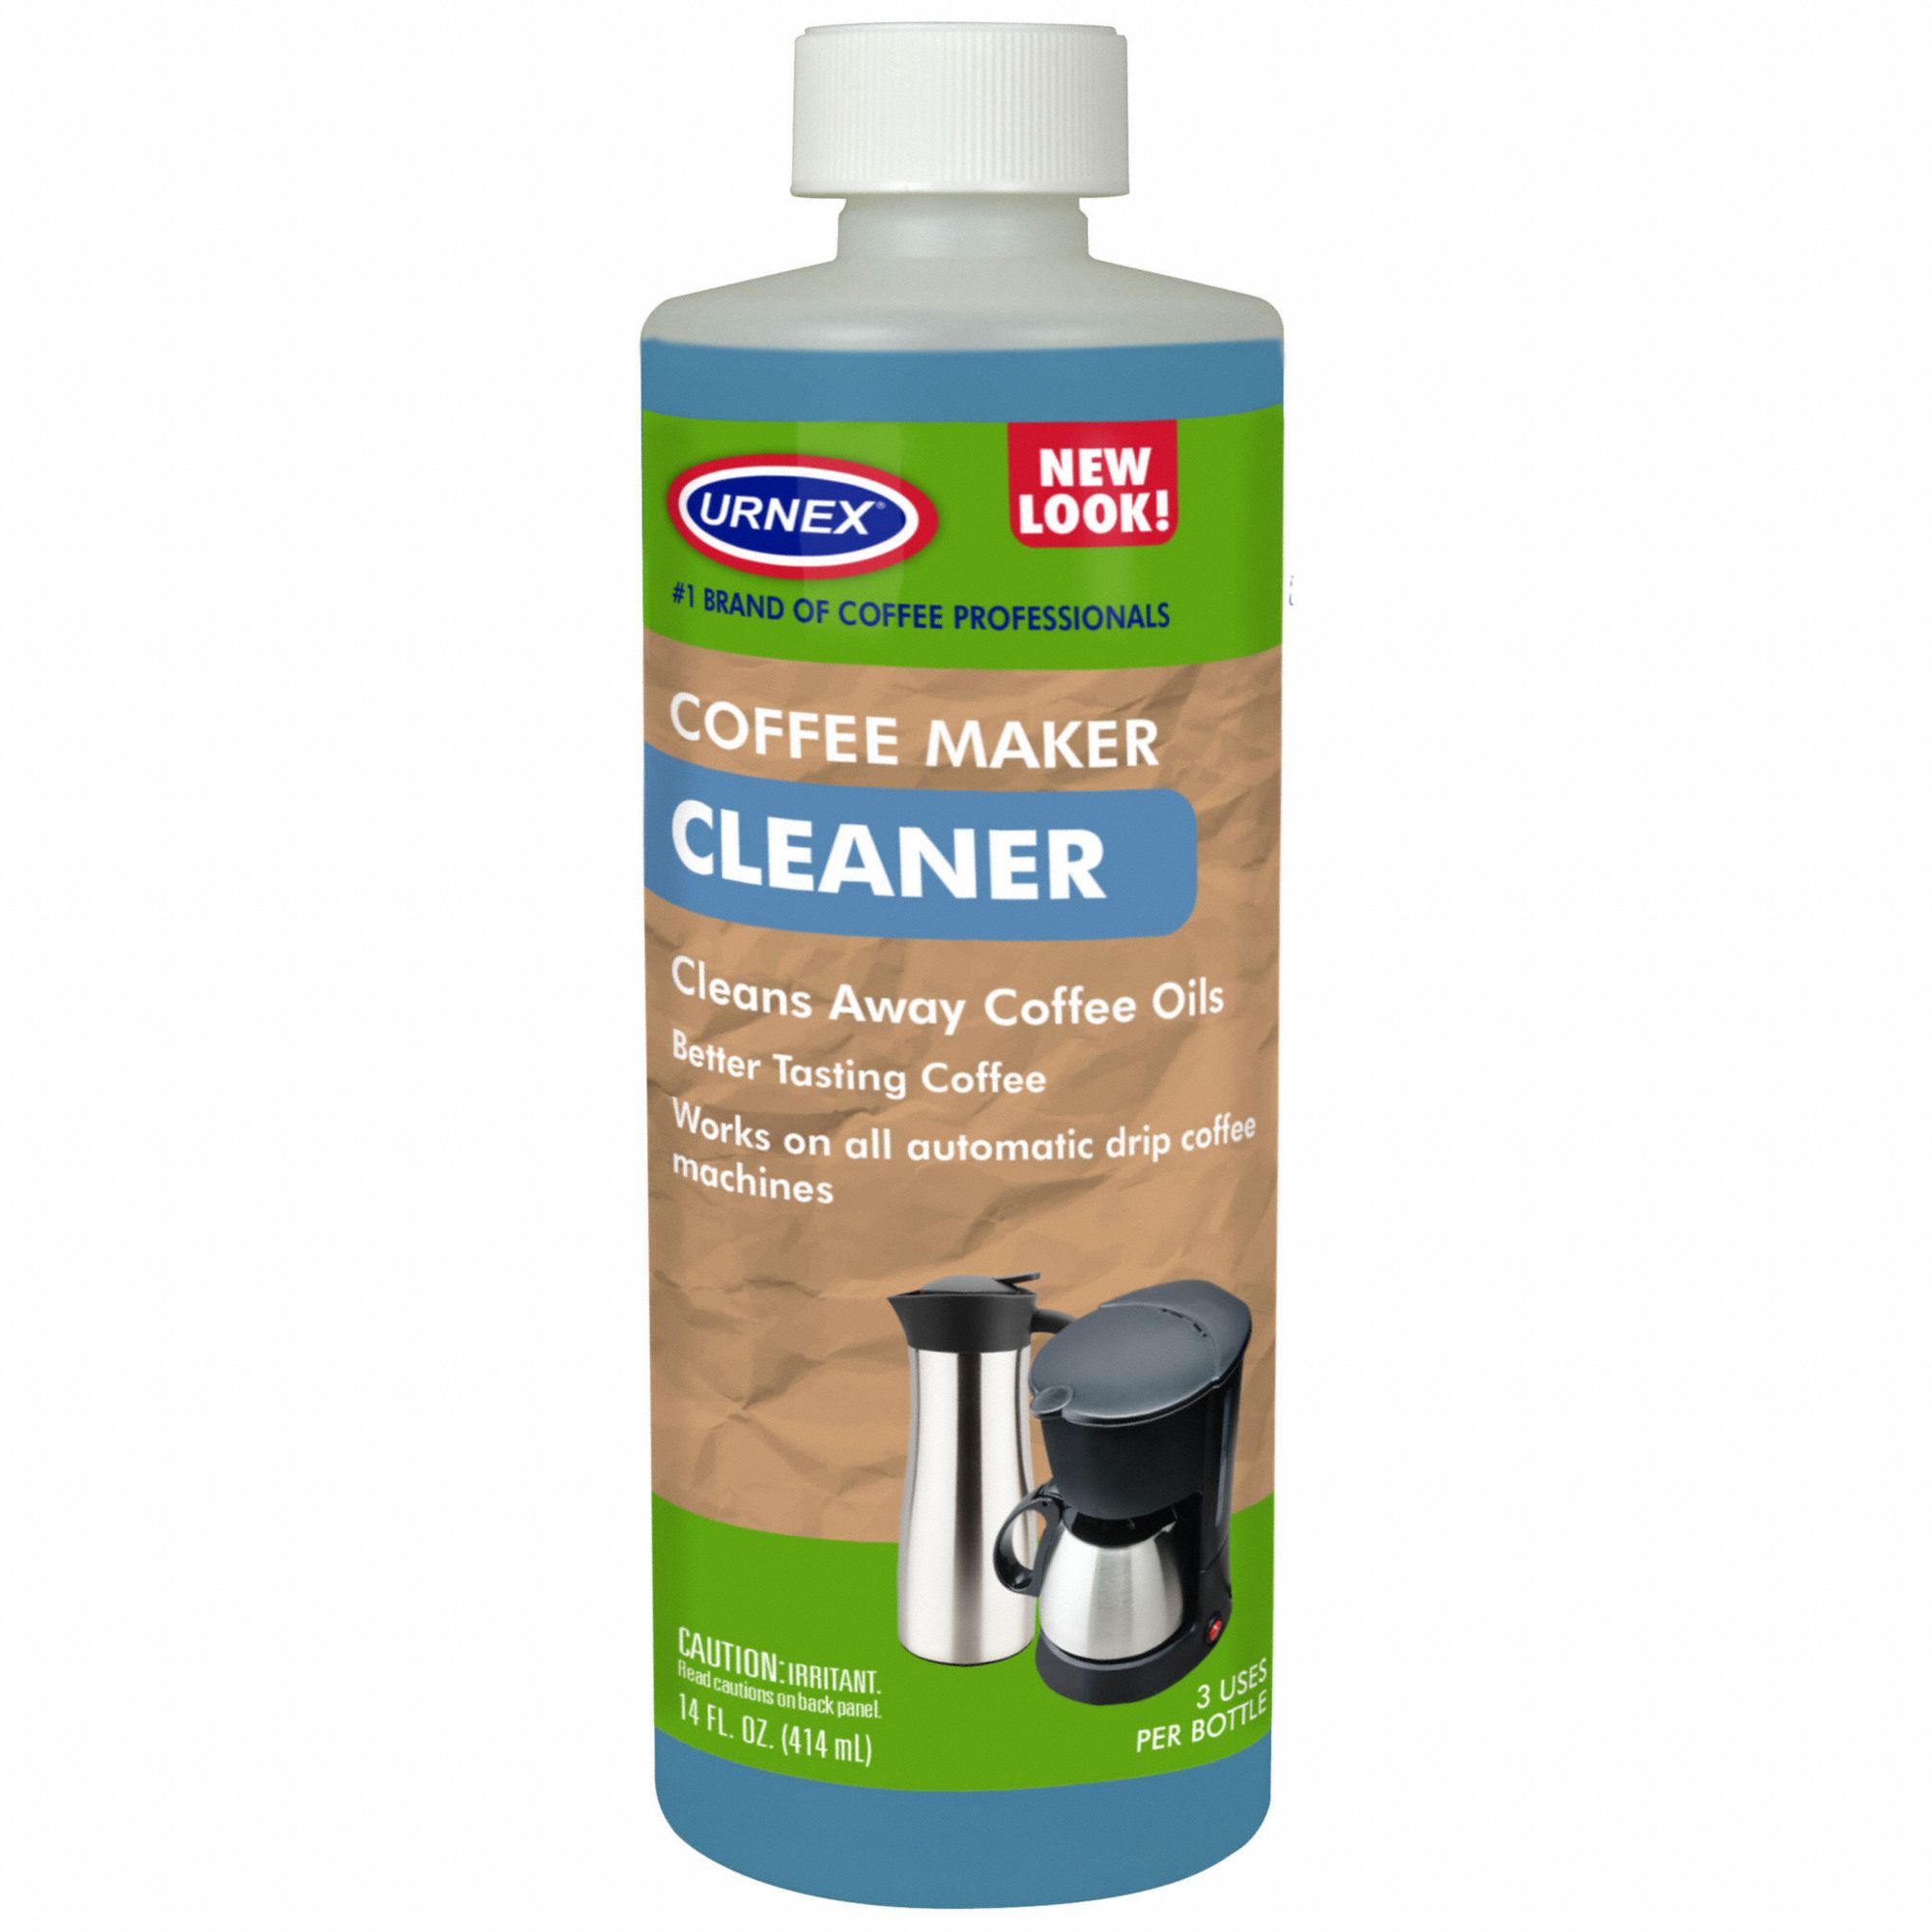 Coffee Equipment Cleaning Liquid: Bottle, 14 oz Container Size, Ready to Use, Unscented